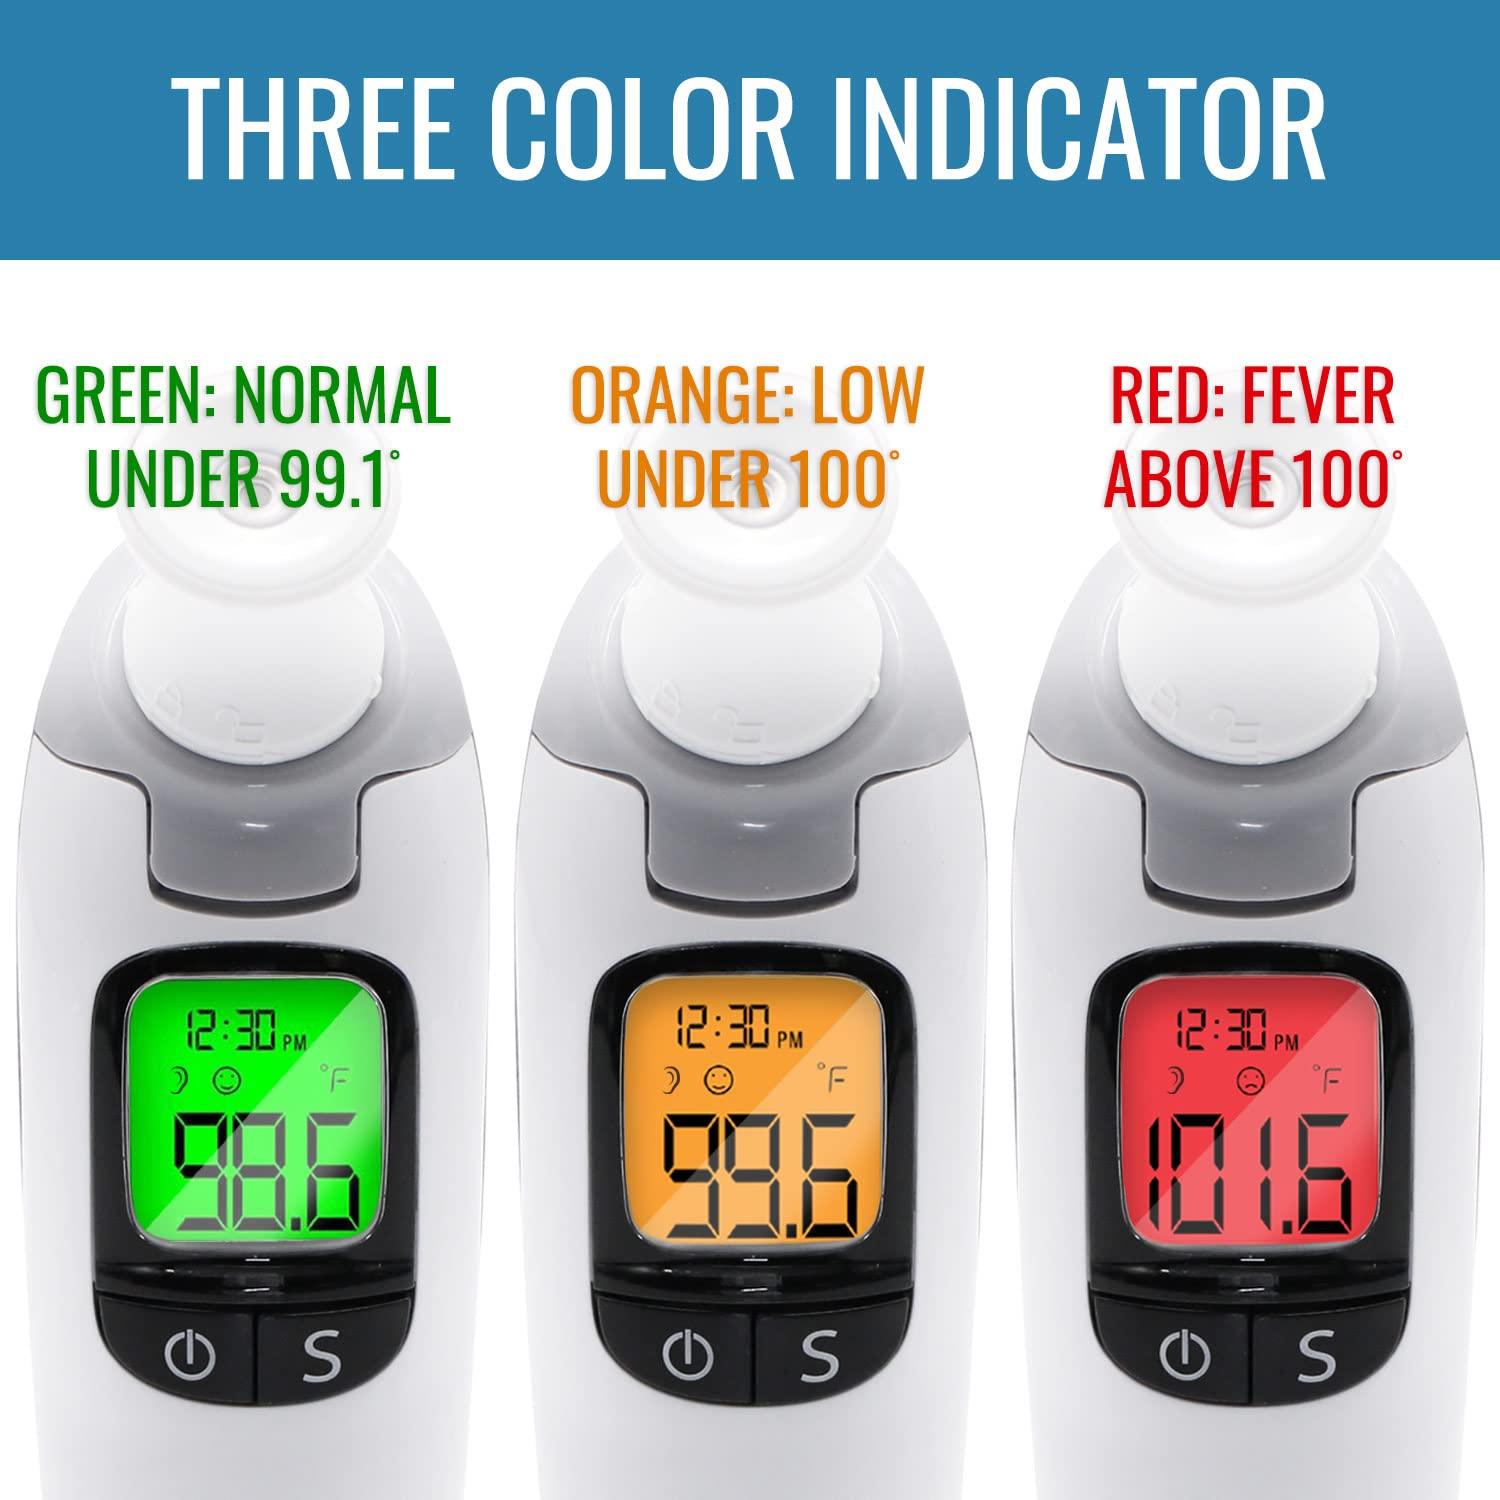 Talking Non Contact Thermometer